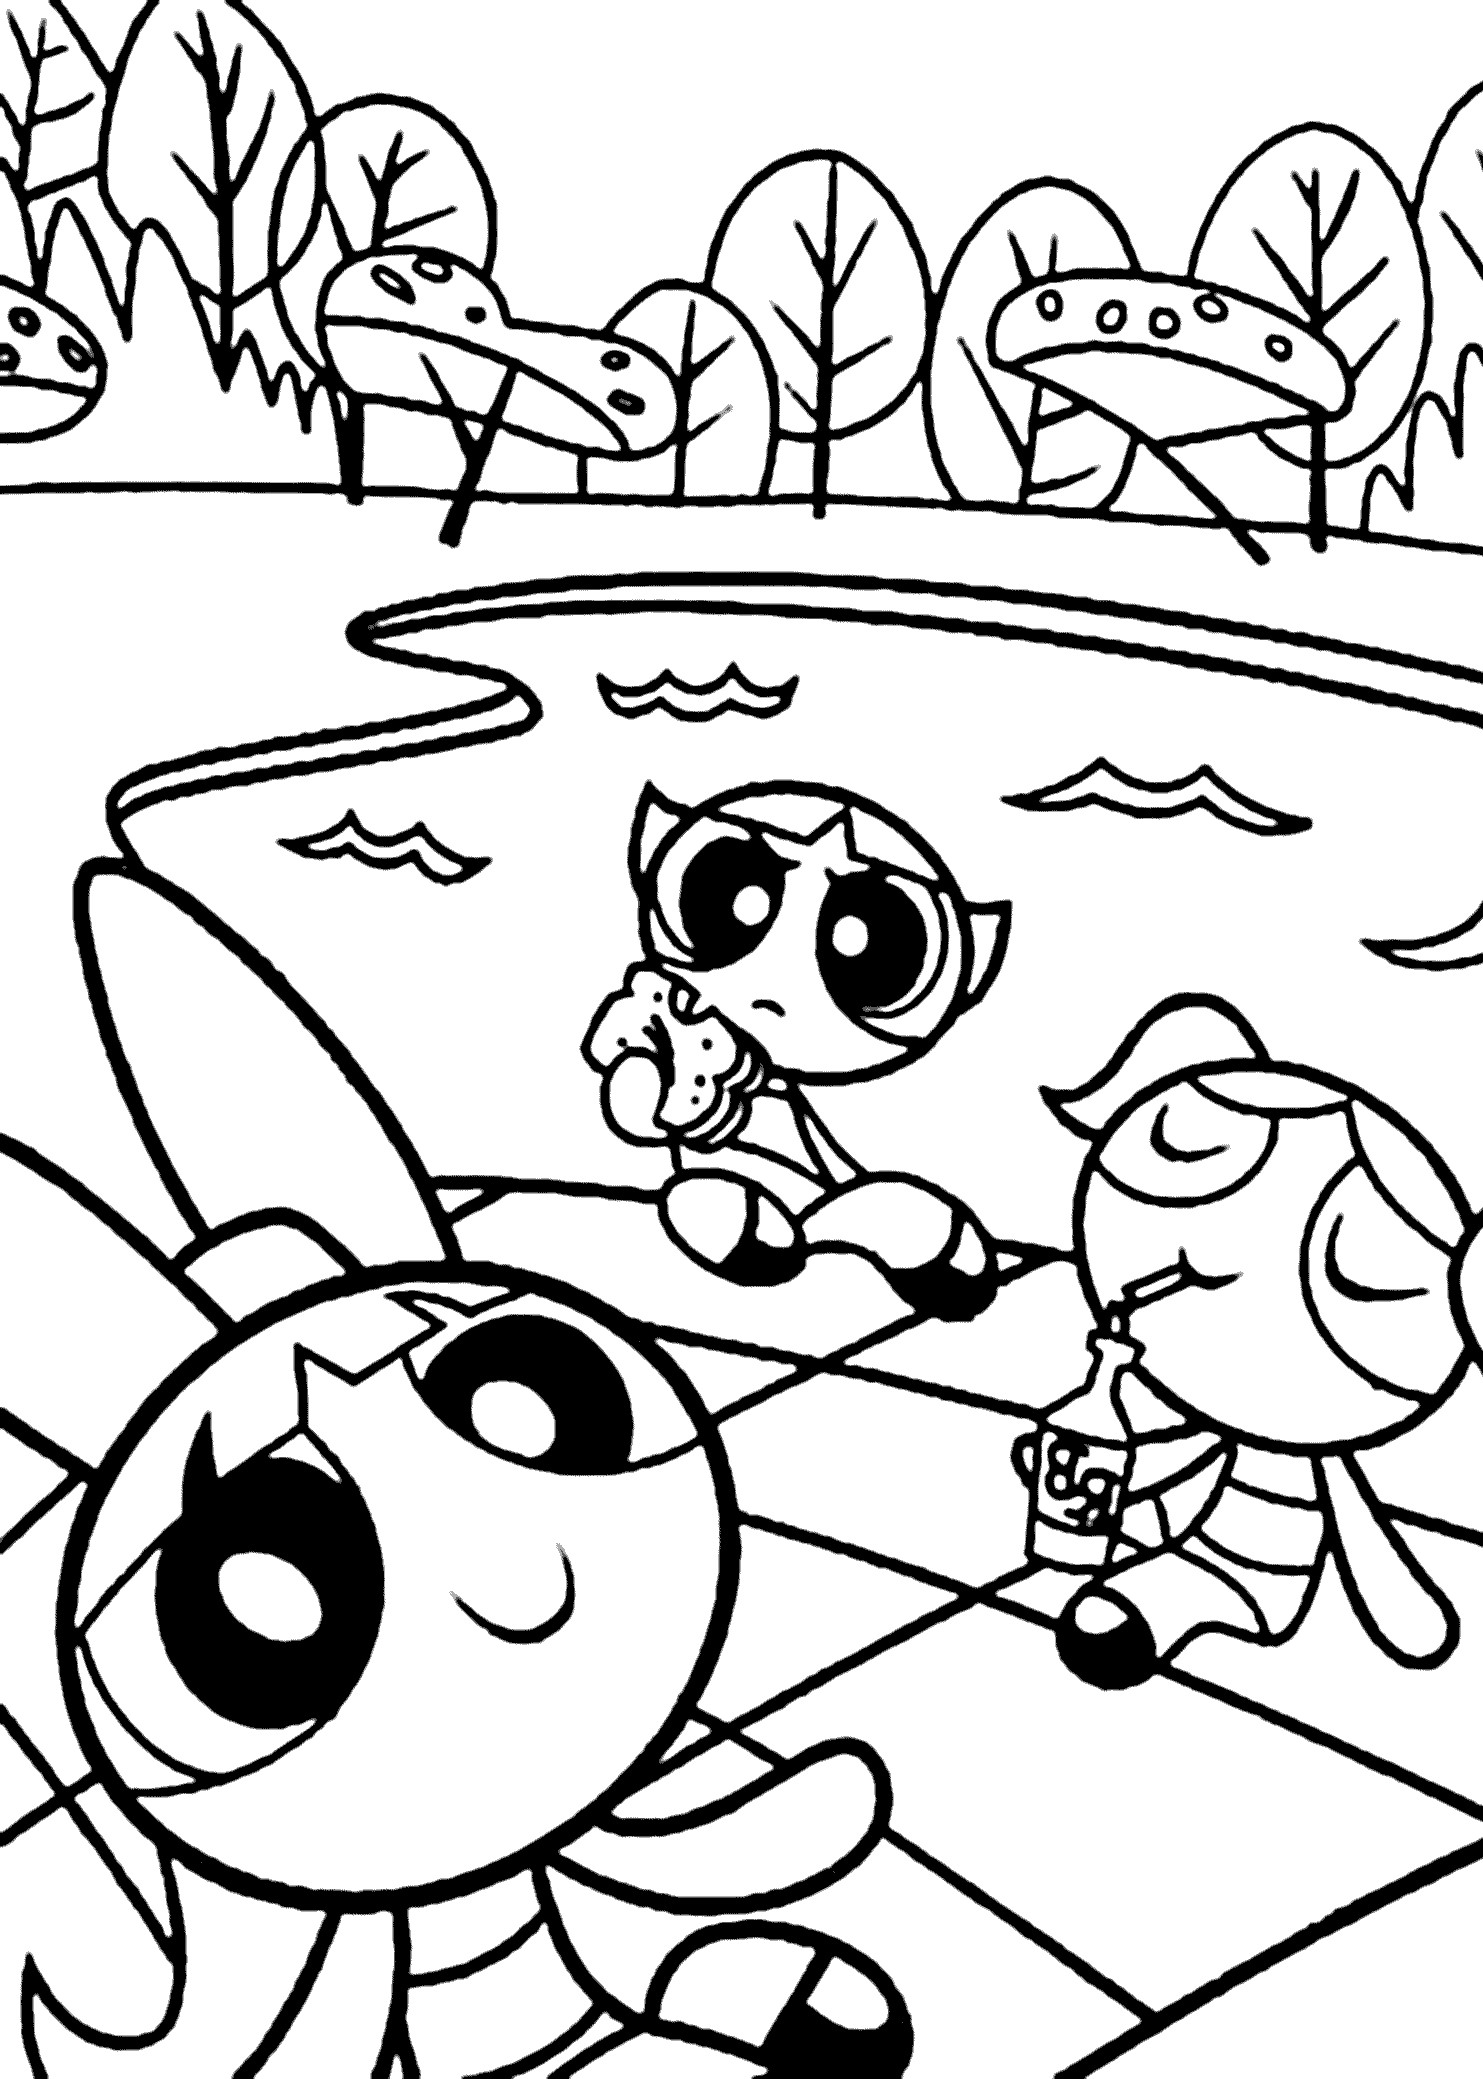 The Powerpuff Girls Coloring Pages
 Ppower Puff Girls Coloring Pages Coloring Home